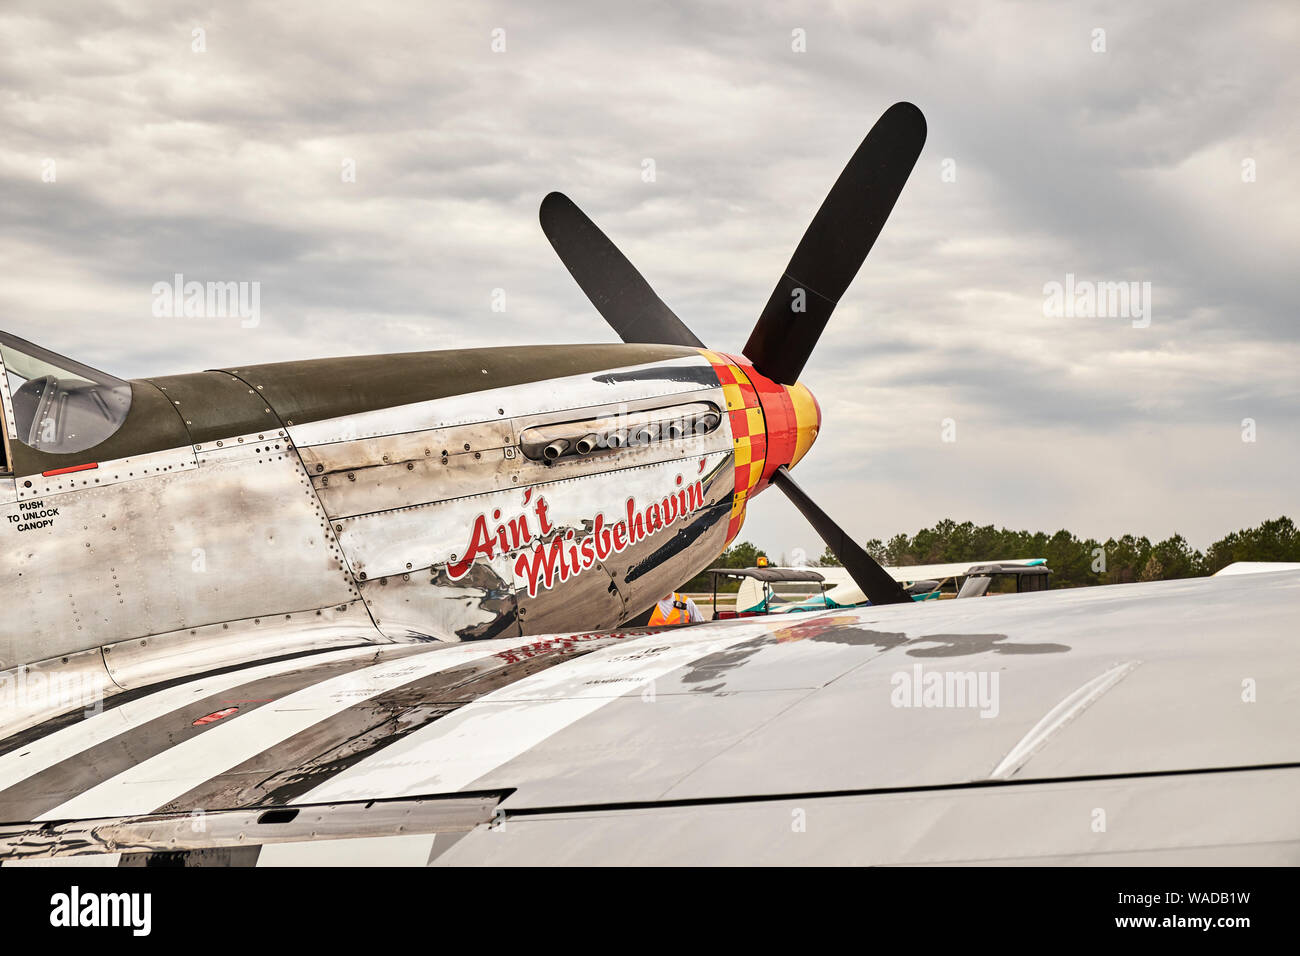 Parked vintage American P 51 Mustang fighter airplane, the Ain't Misbehaven, from WWII era in Bessemer Alabama, USA. Stock Photo